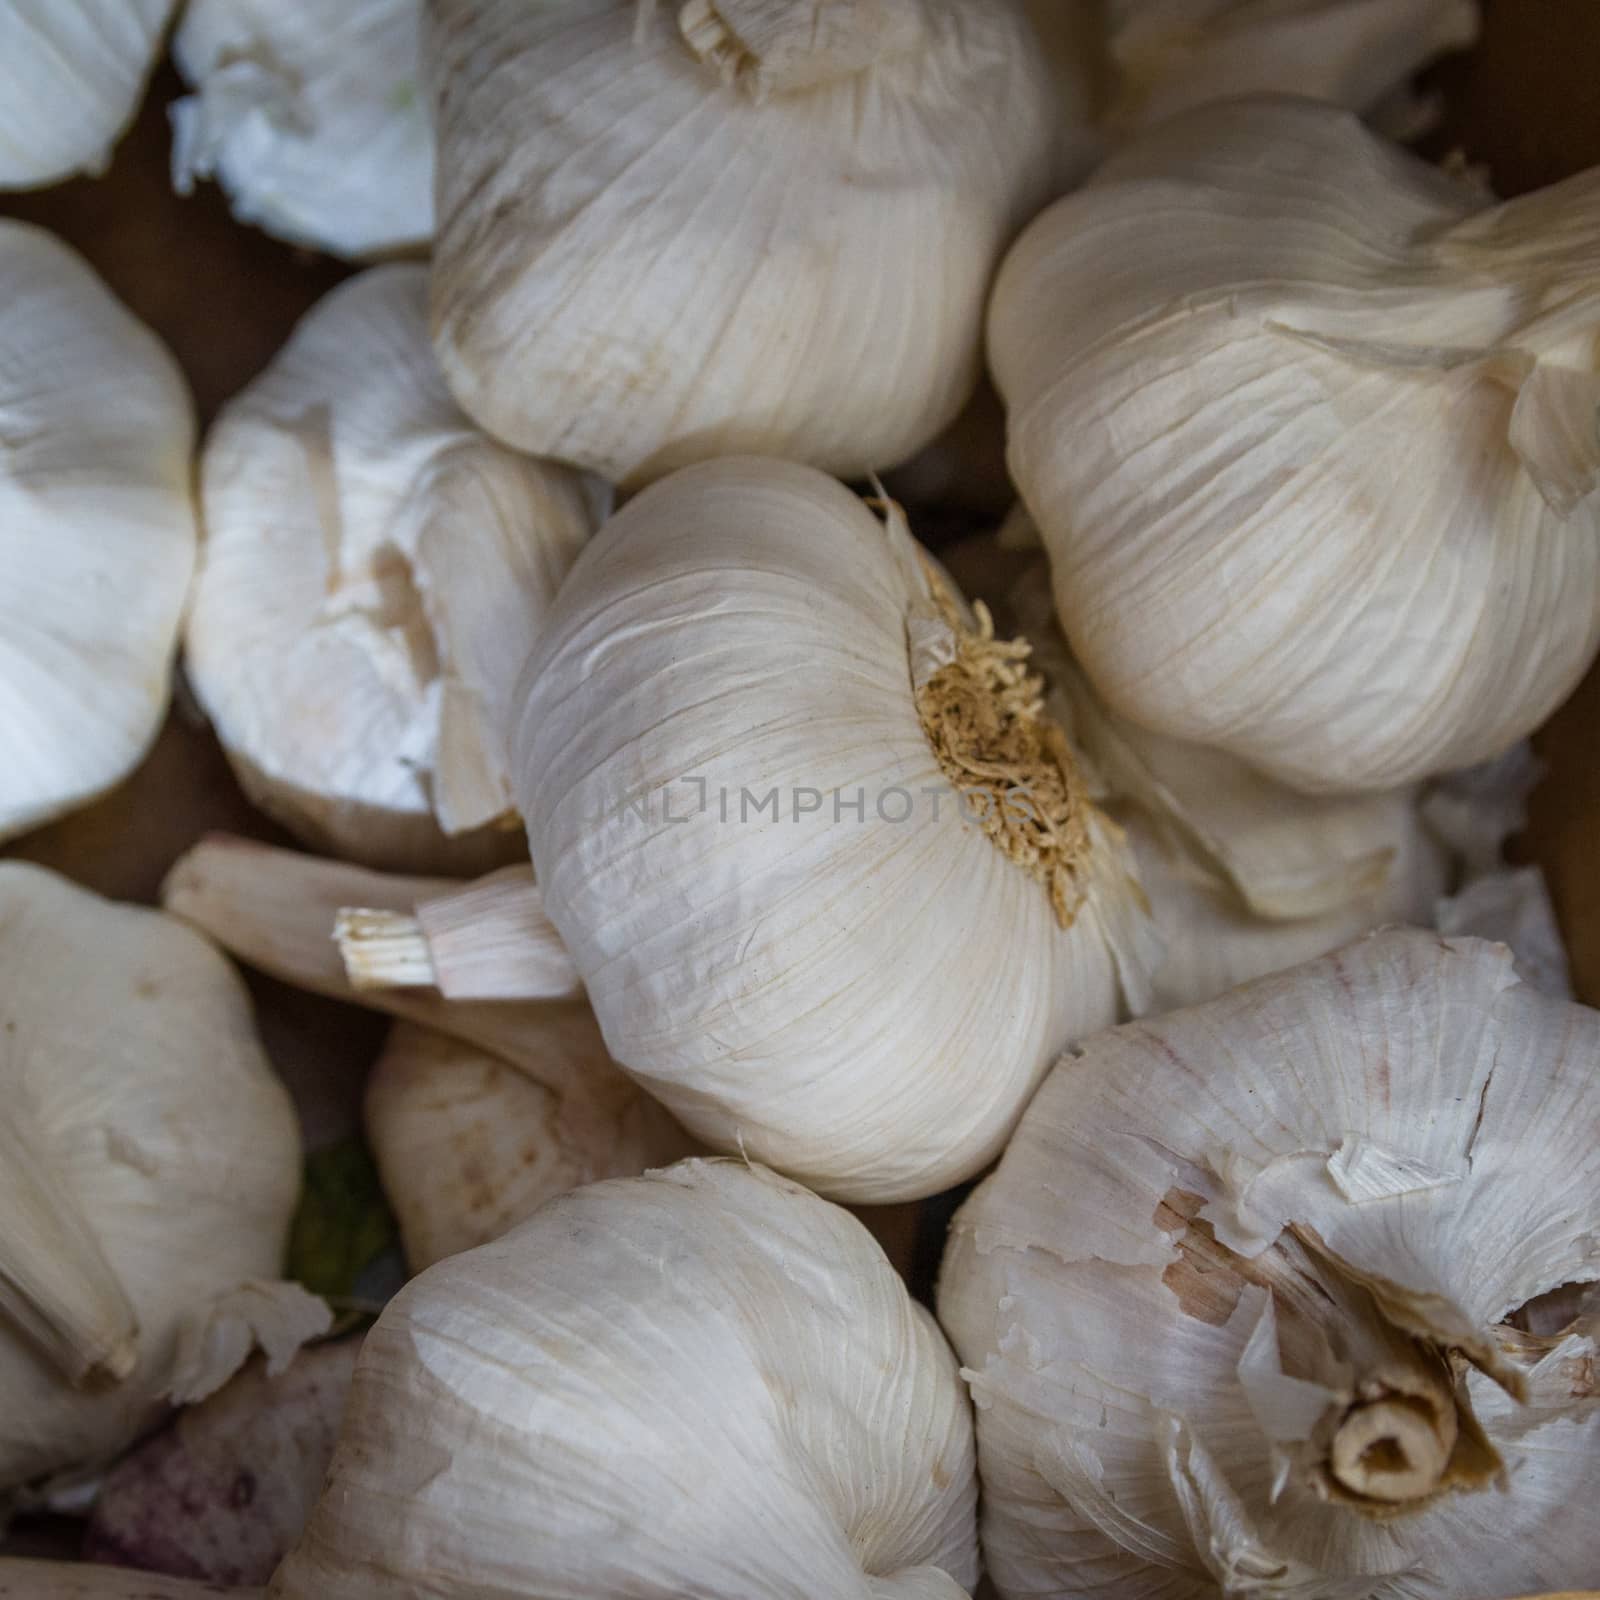 Garlic is a bulbous plant grown, Its first use is to seasoning